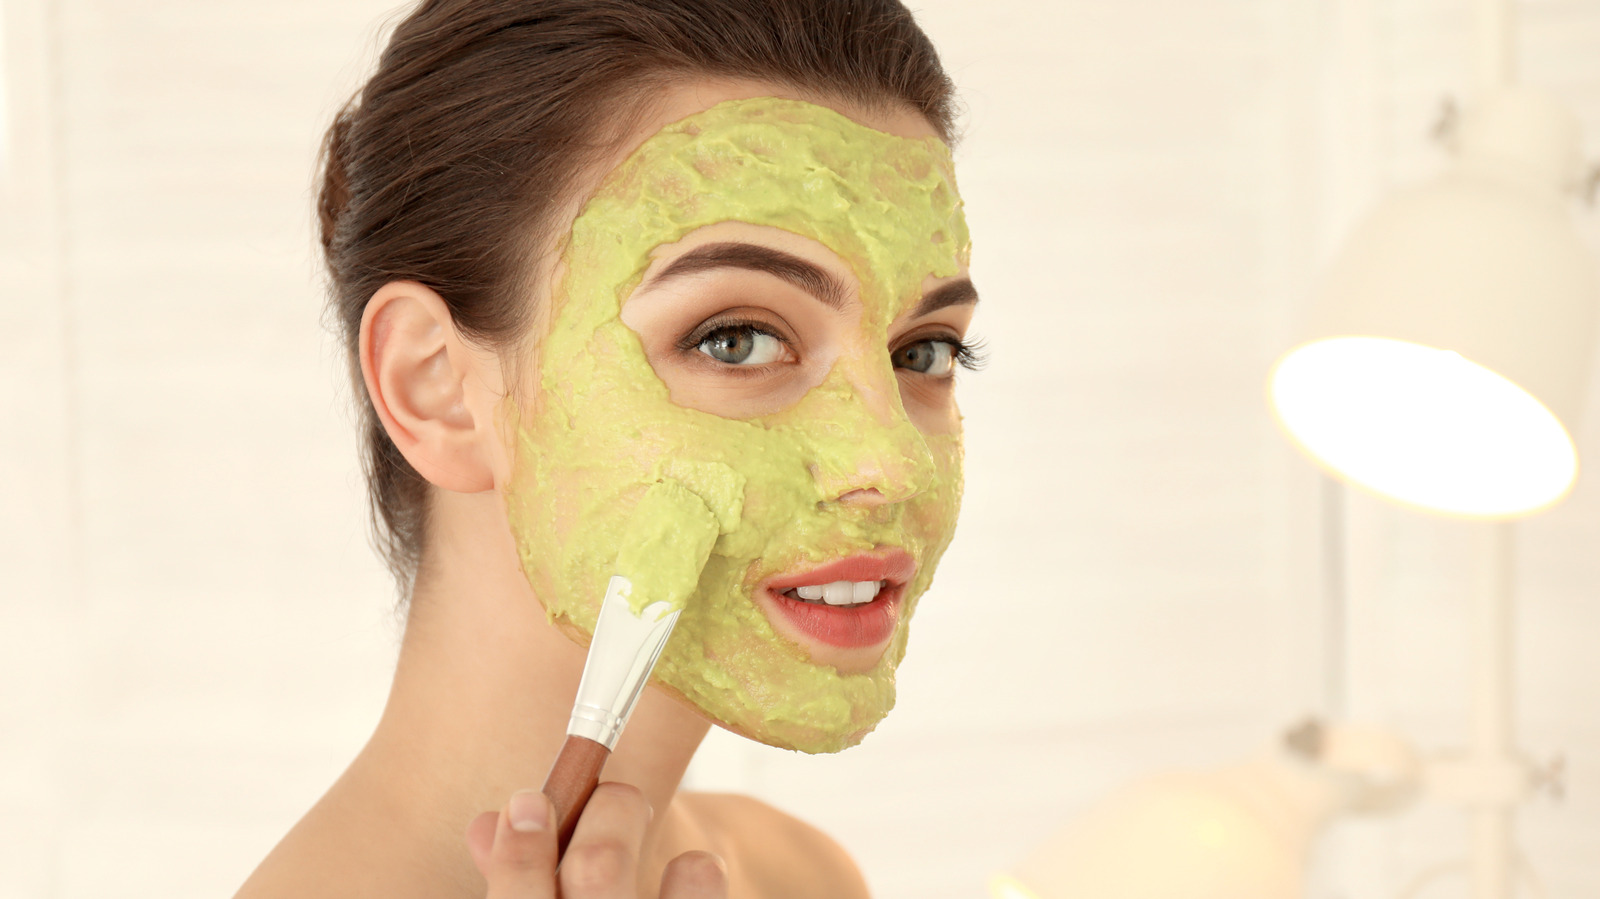 15 DIY Face Mask Ideas For Your Next Self-Care picture